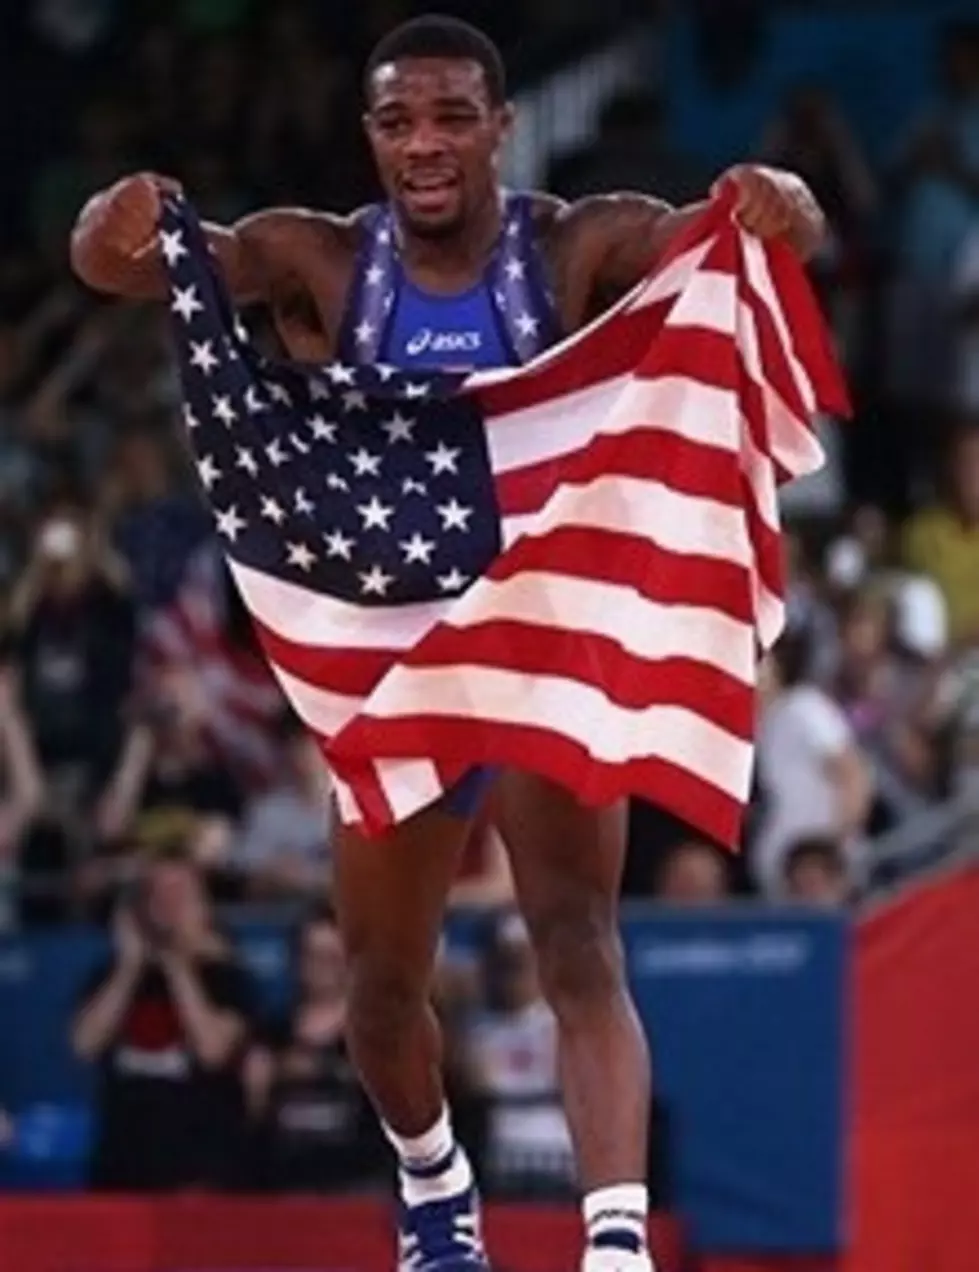 South Jersey&#8217;s Burroughs Closes The Deal &#8211; Wrestler Wins Gold in London